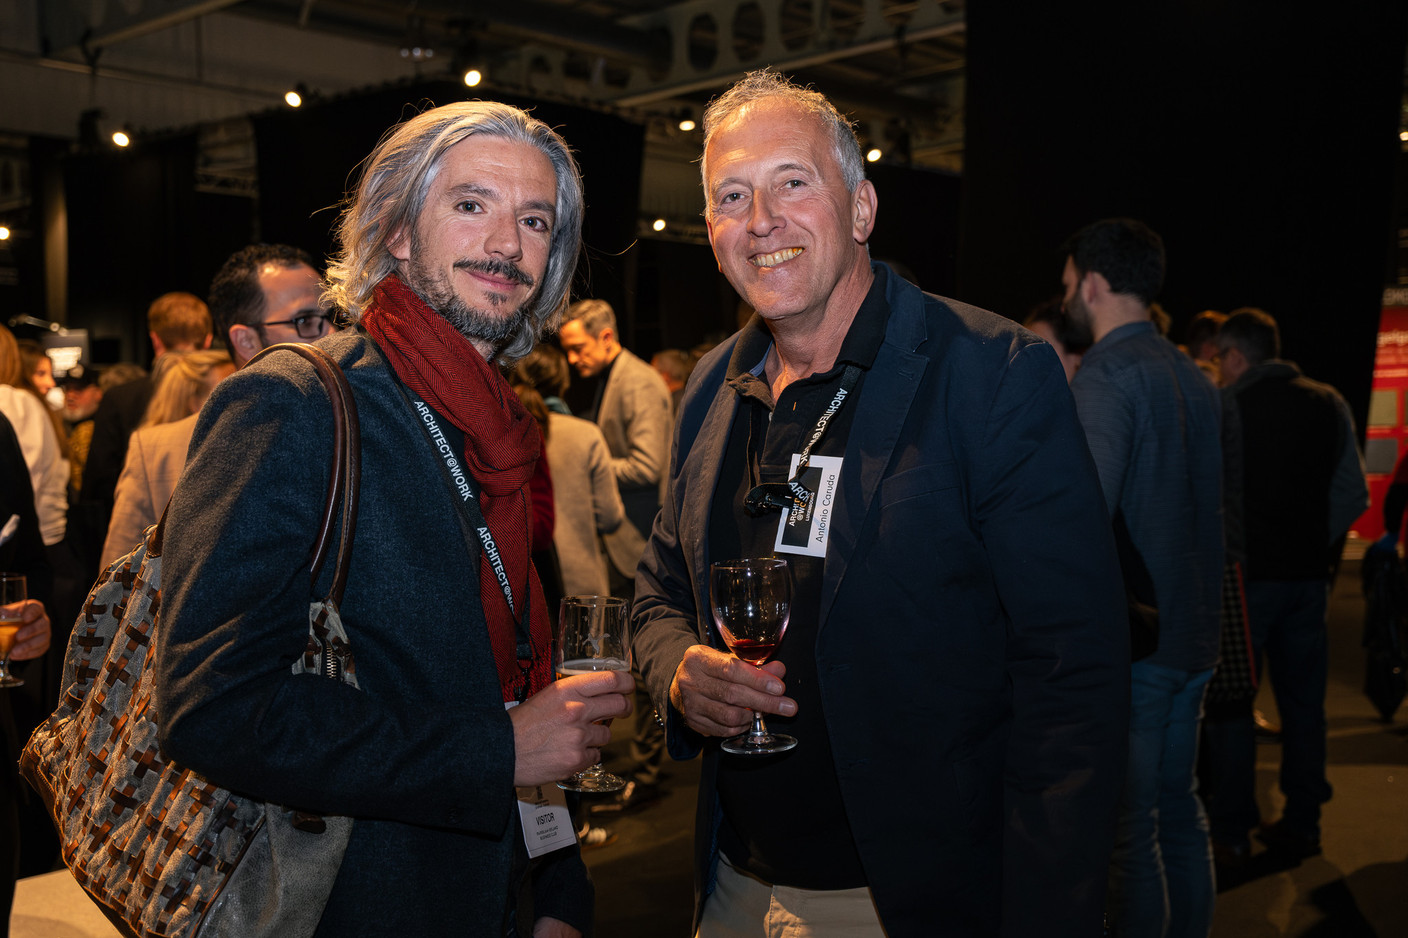 Paolo Palomba (saharchitect) and Antonio Caruda (AC) at the 10x6 New European Bauhaus event organised by the Paperjam+Delano Business Club, 24 April 2024. Photo: Laurent Sturm